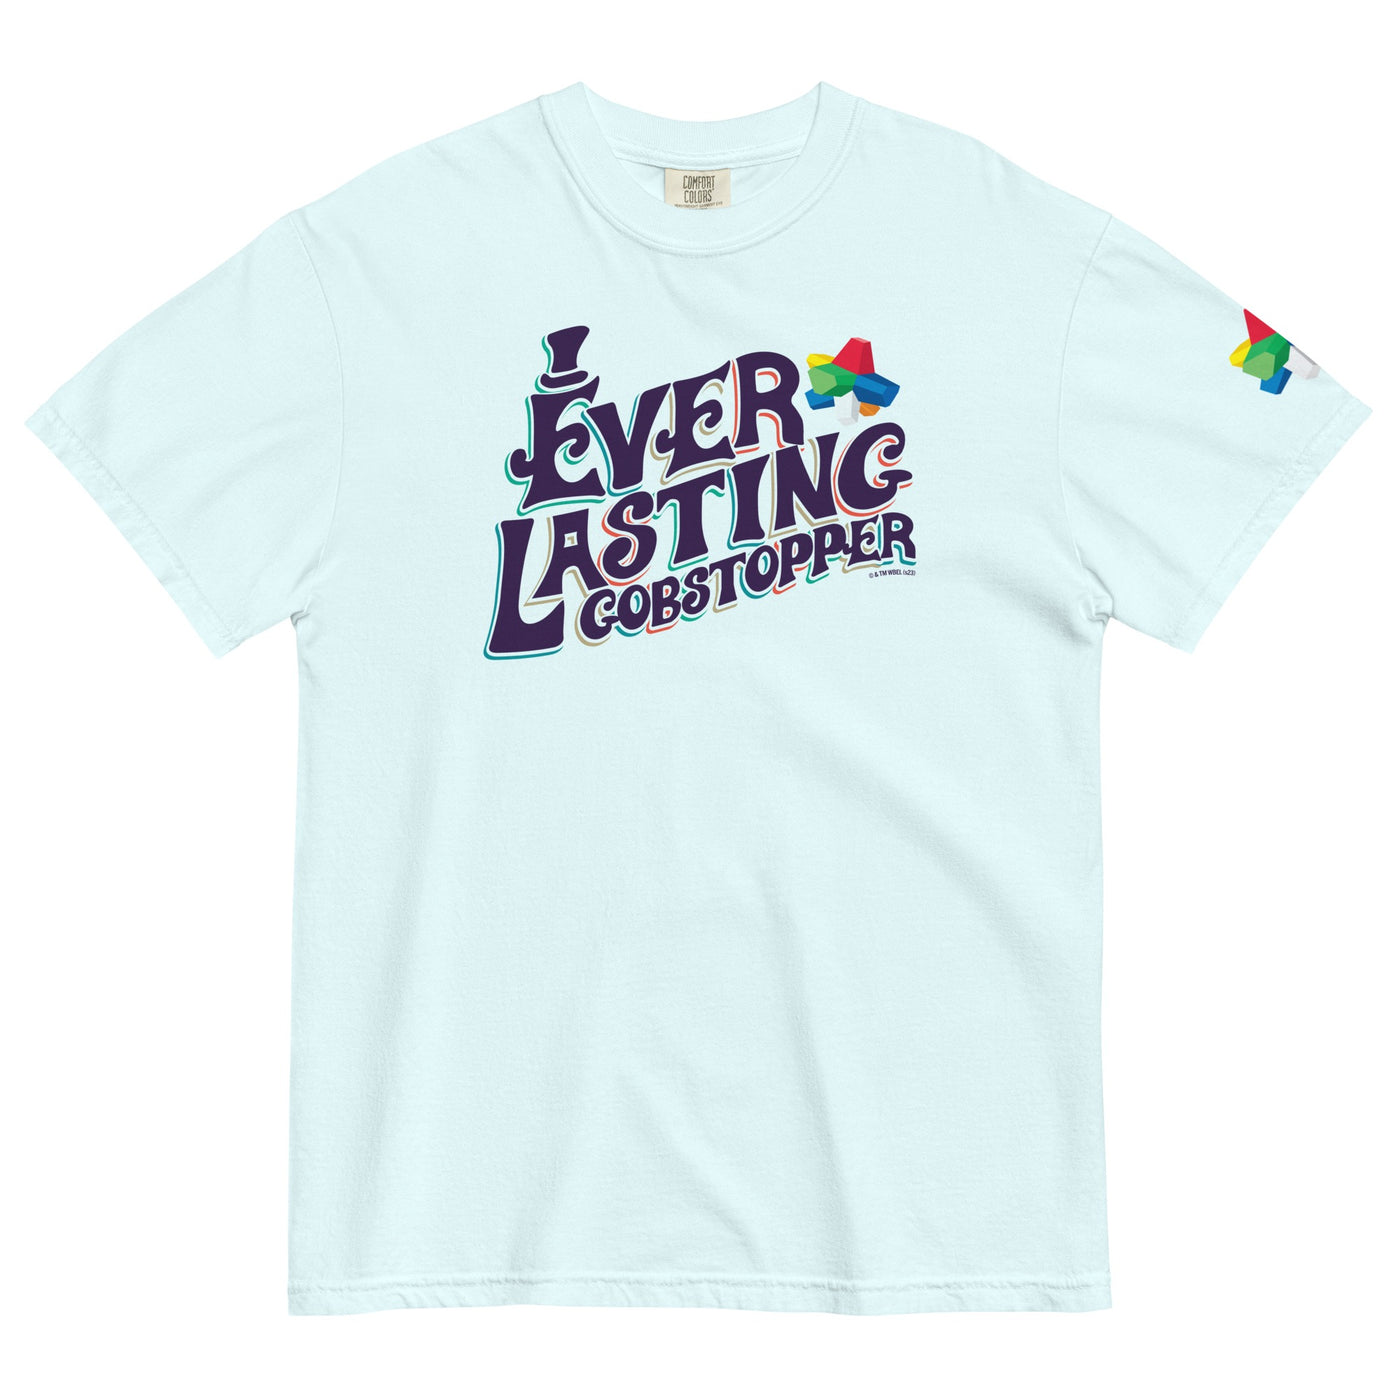 Willy Wonka and the Chocolate Factory Everlasting Gobstopper T-Shirt